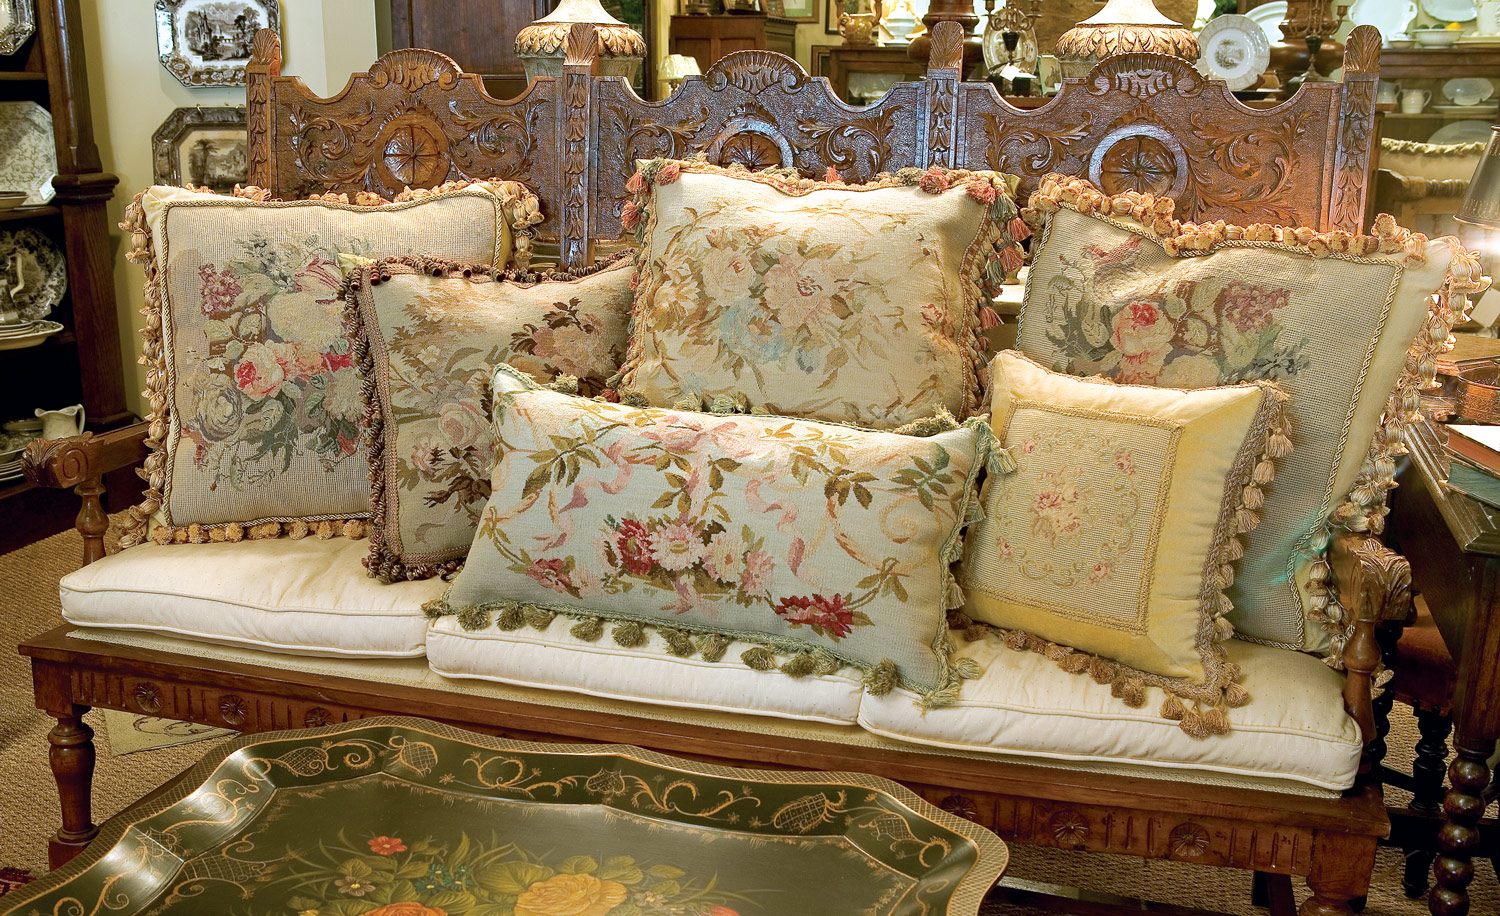 Classic Décor: Using Roses to Embellish Your Home